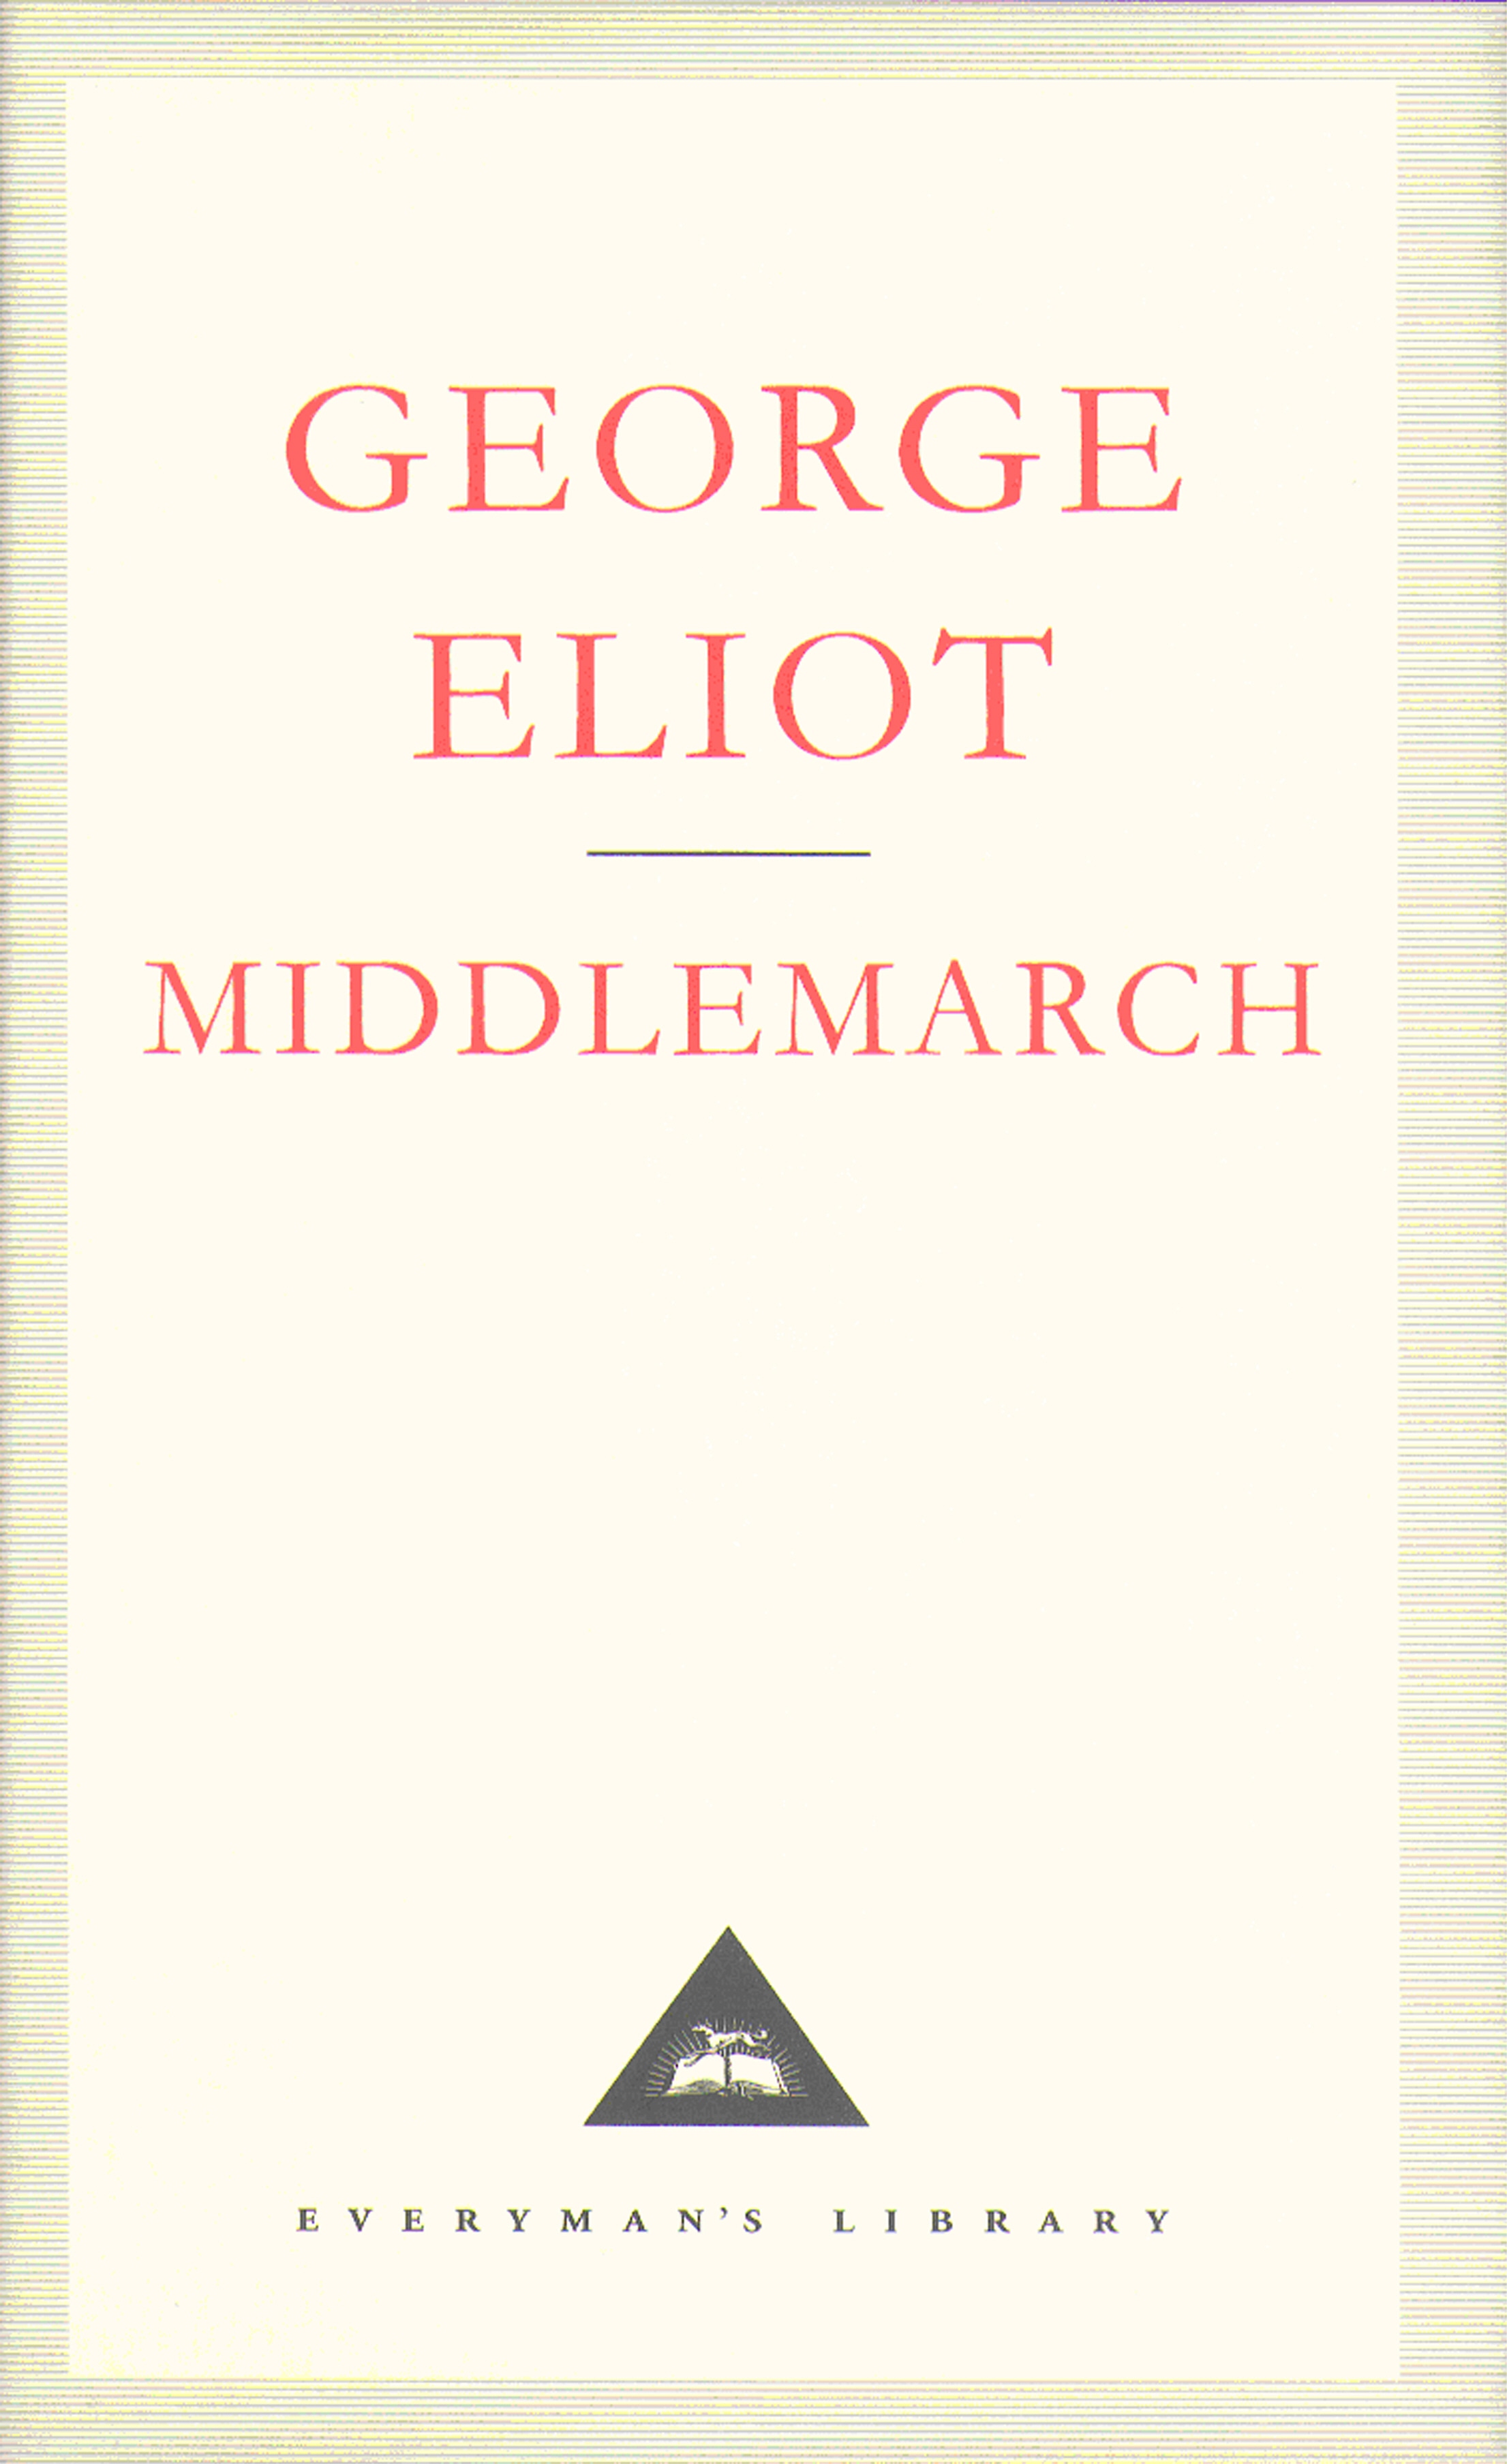 Book “Middlemarch” by George Eliot — September 26, 1991